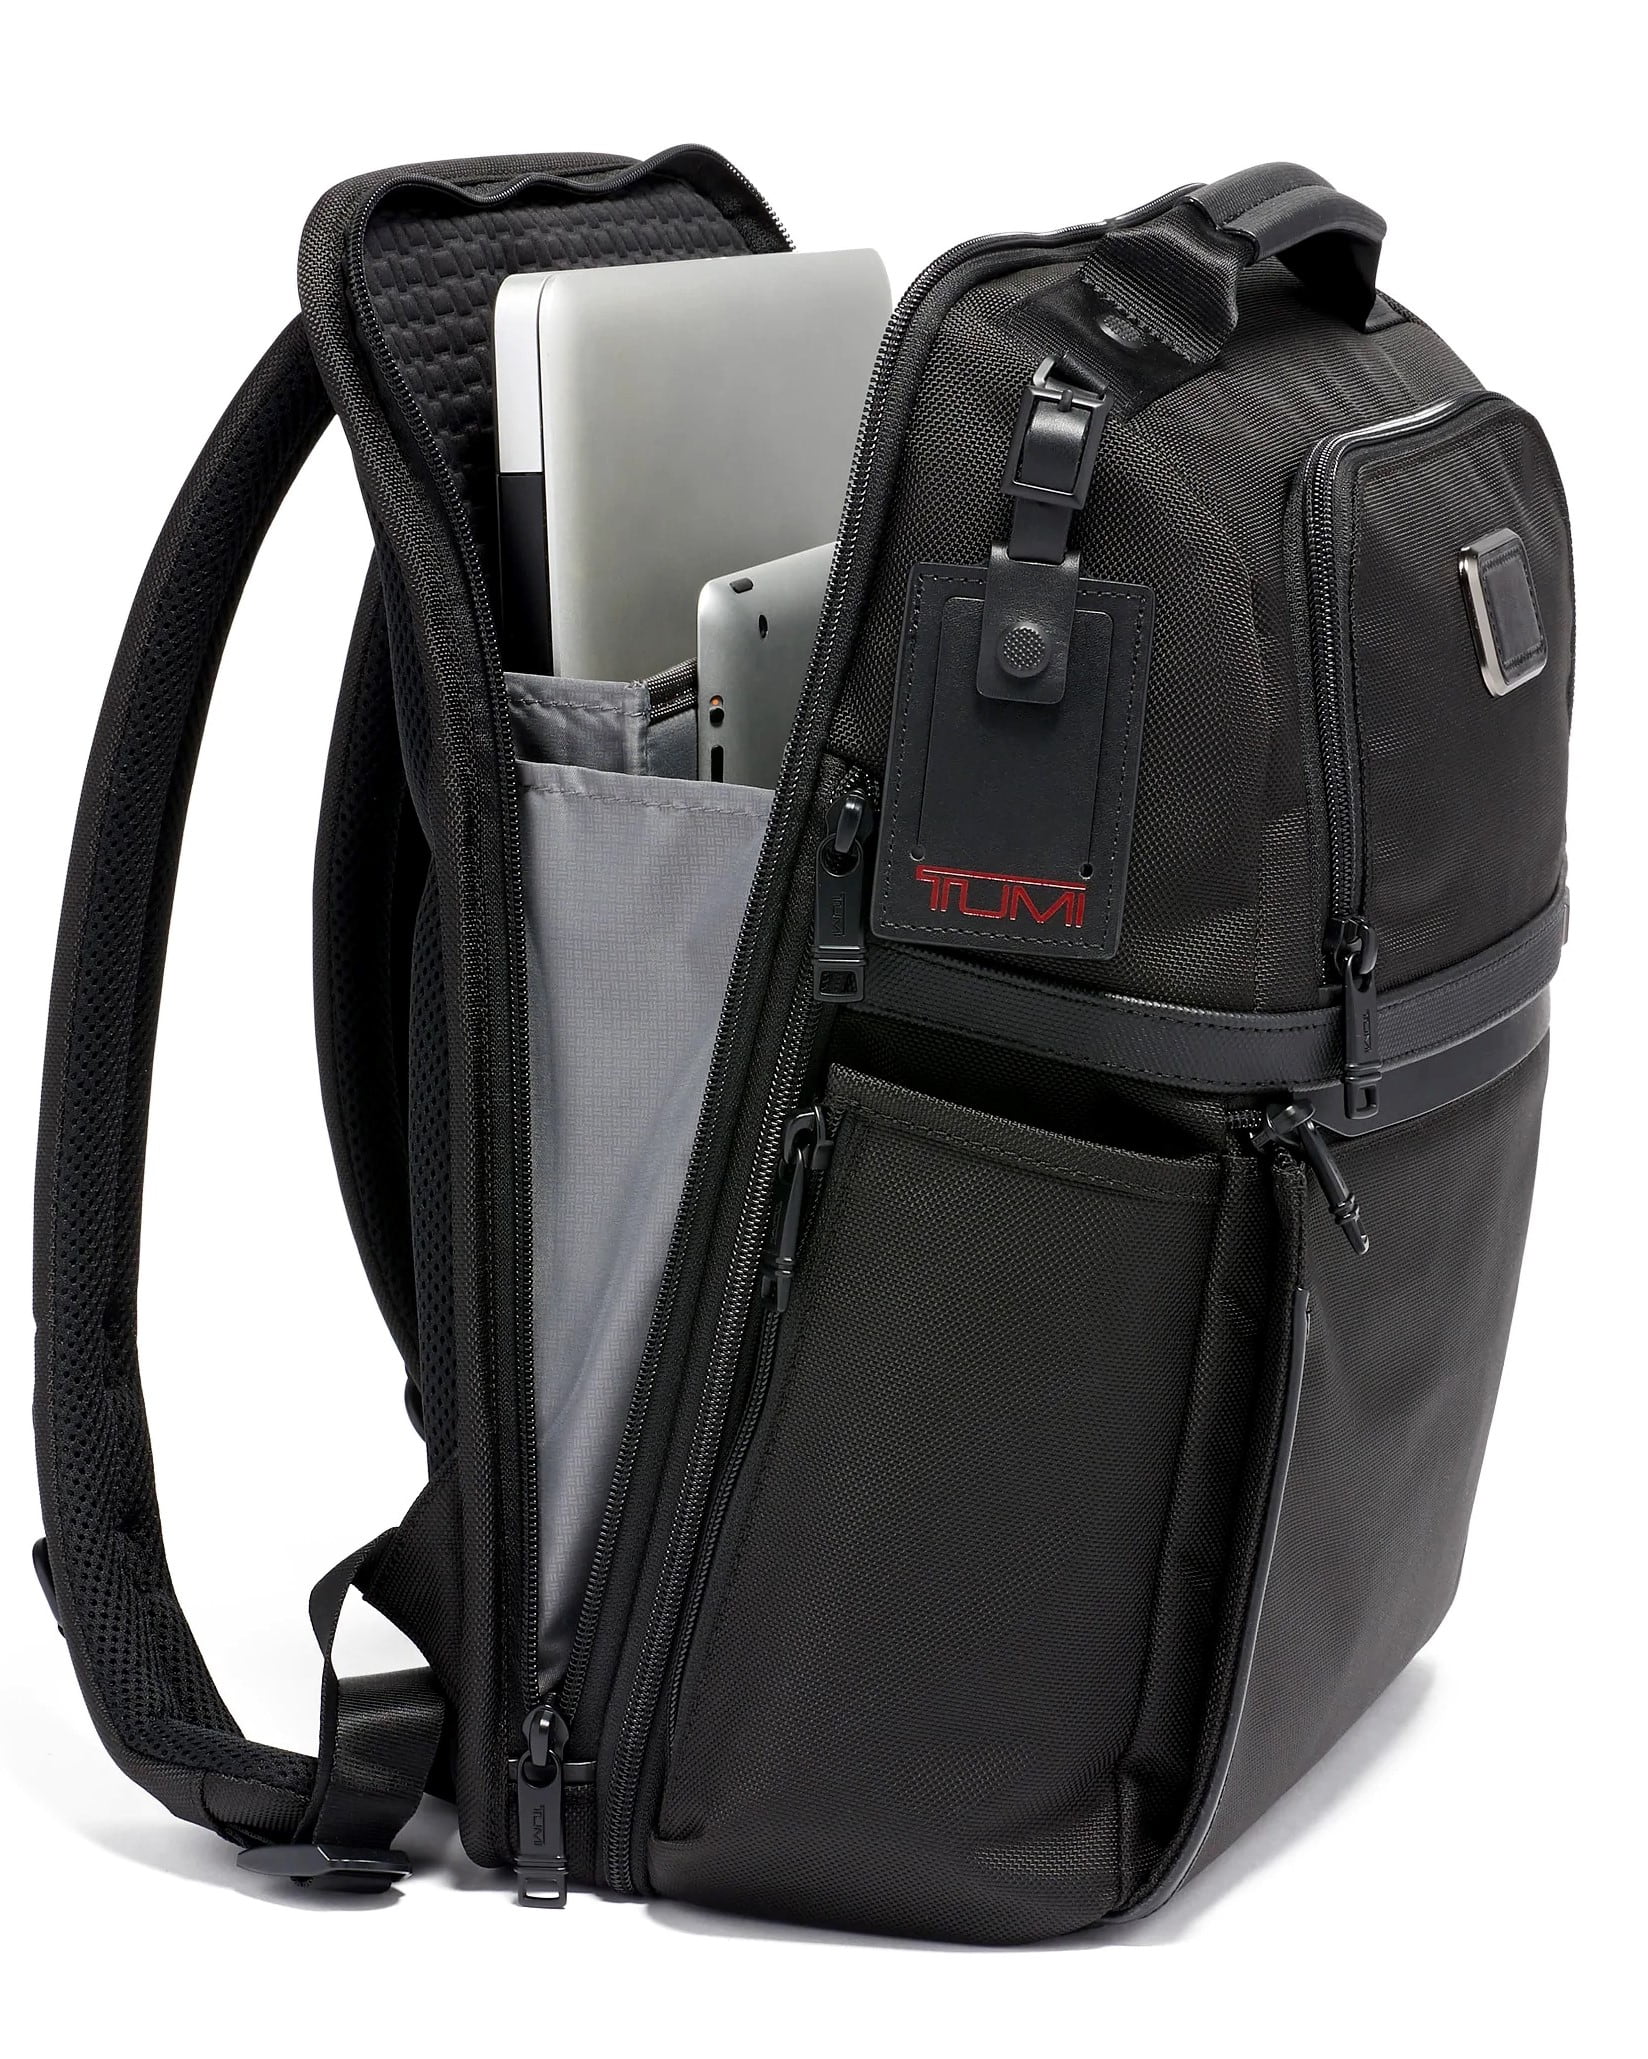 BALO LAPTOP TUMI ALPHA SLIM SOLUTIONS BRIEF PACK BACKPACK 1